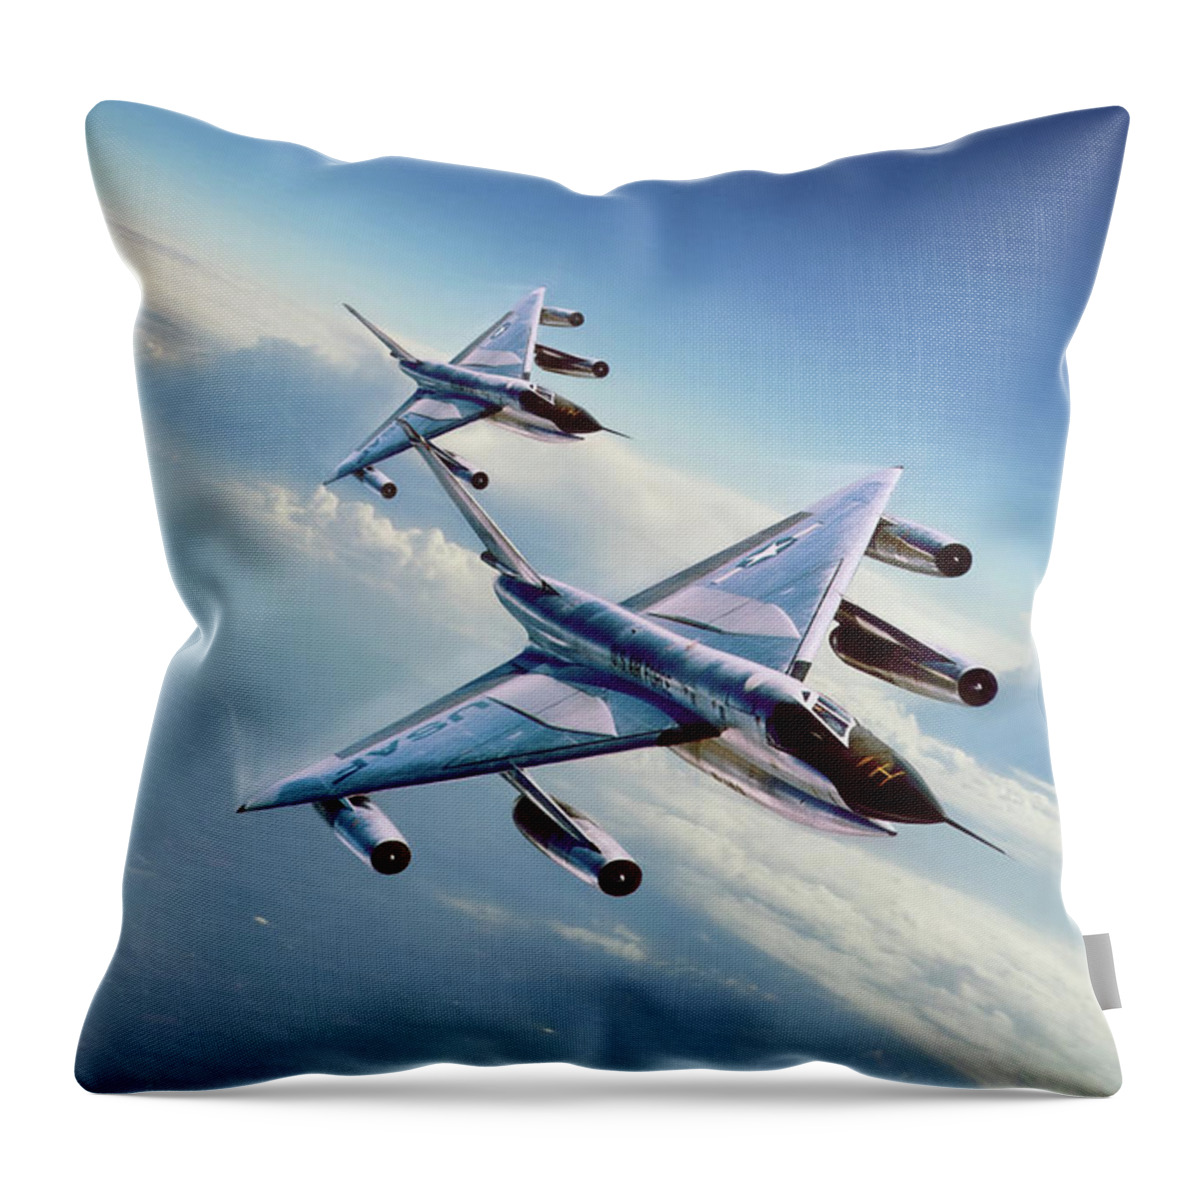 Aviation Throw Pillow featuring the digital art Operation Heat Rise by Peter Chilelli